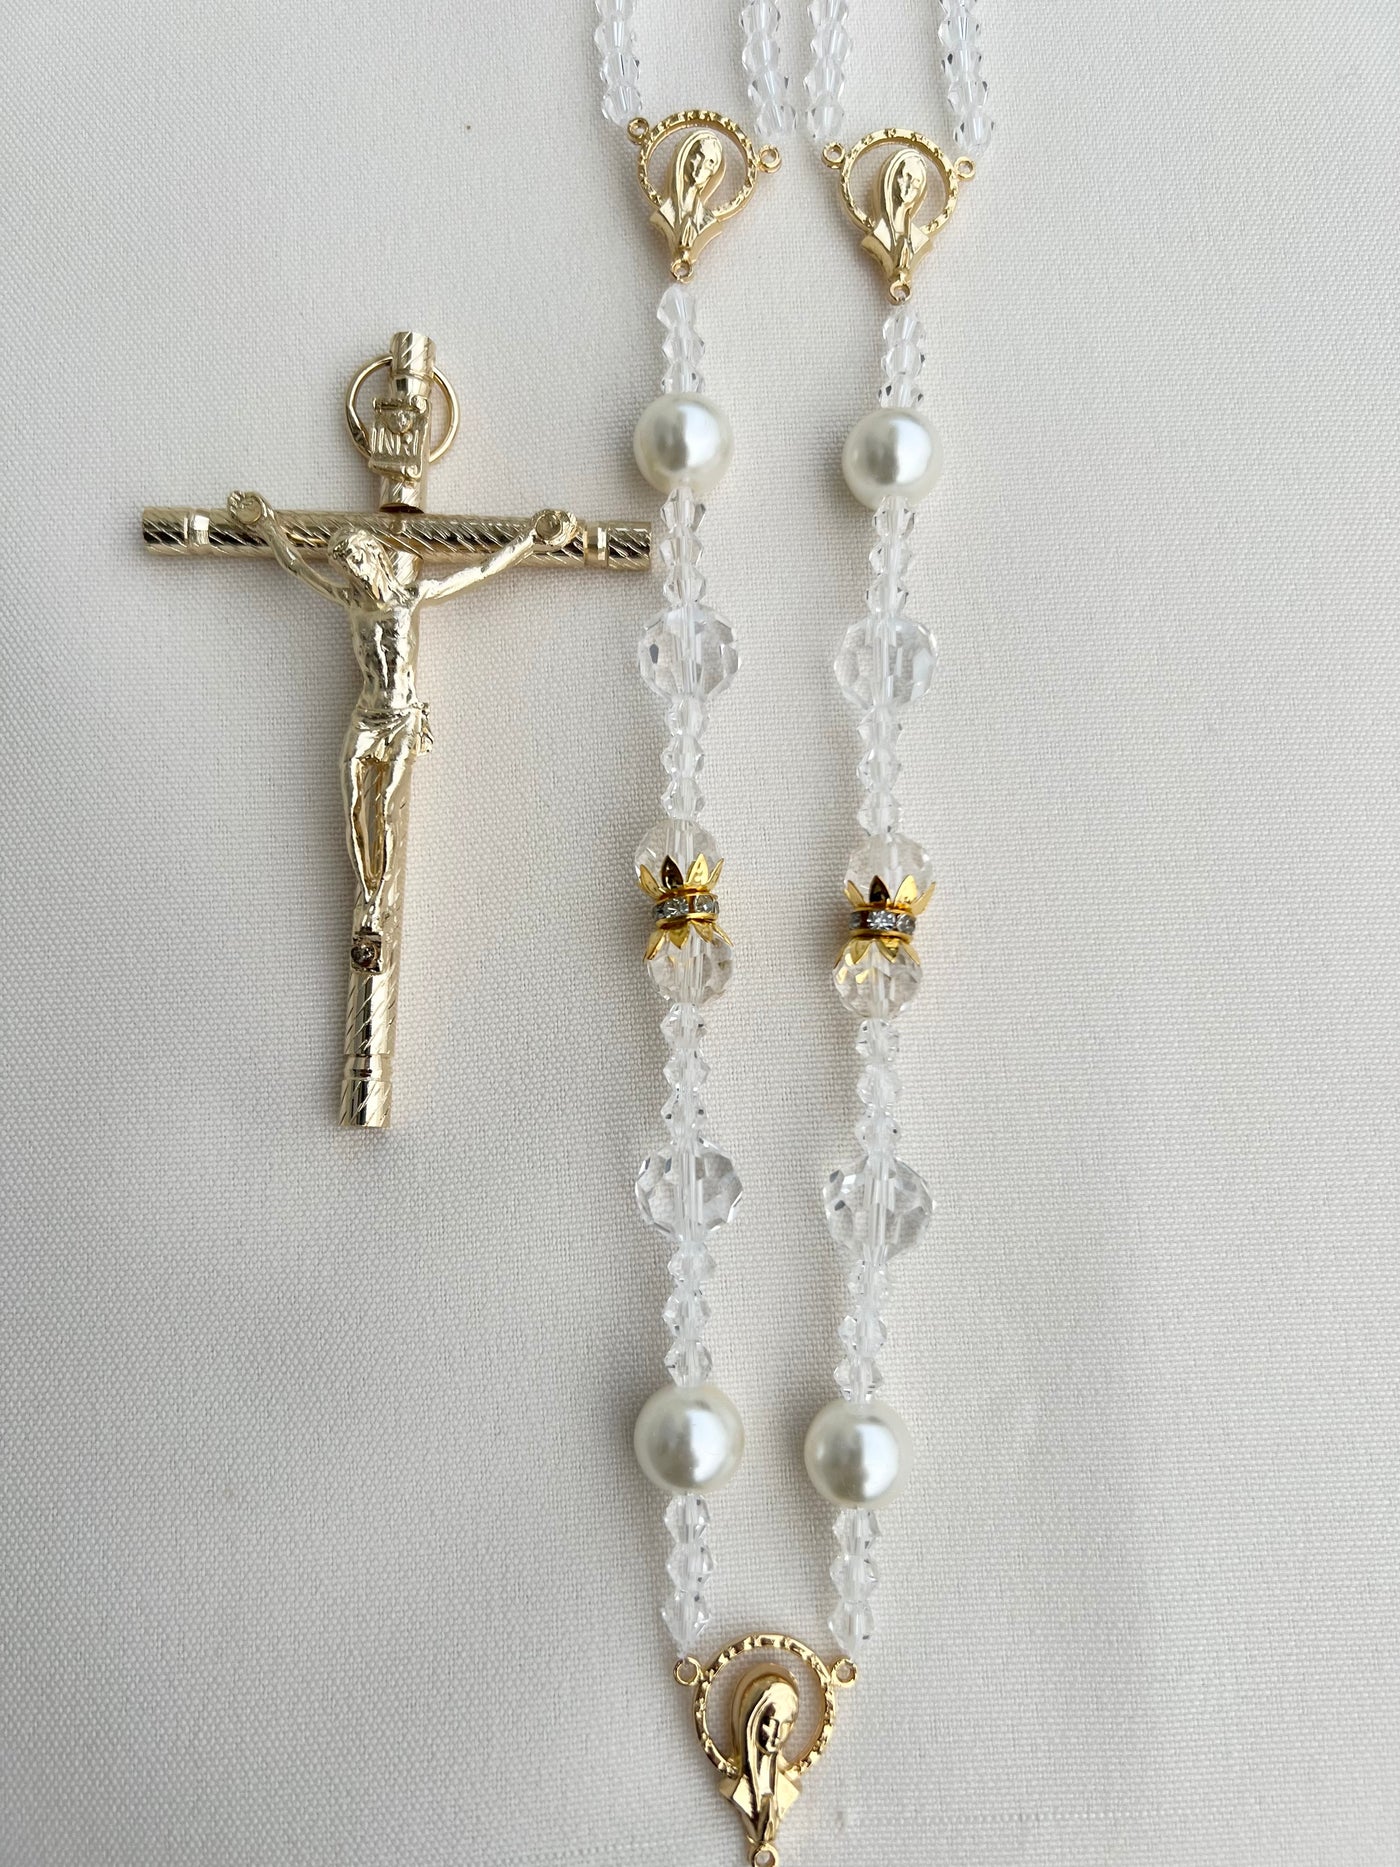 Pearl & Crystal Bead Lasso with Filigree Rhinestone Cross by Lucky Collections ™. Classic Laso de Boda